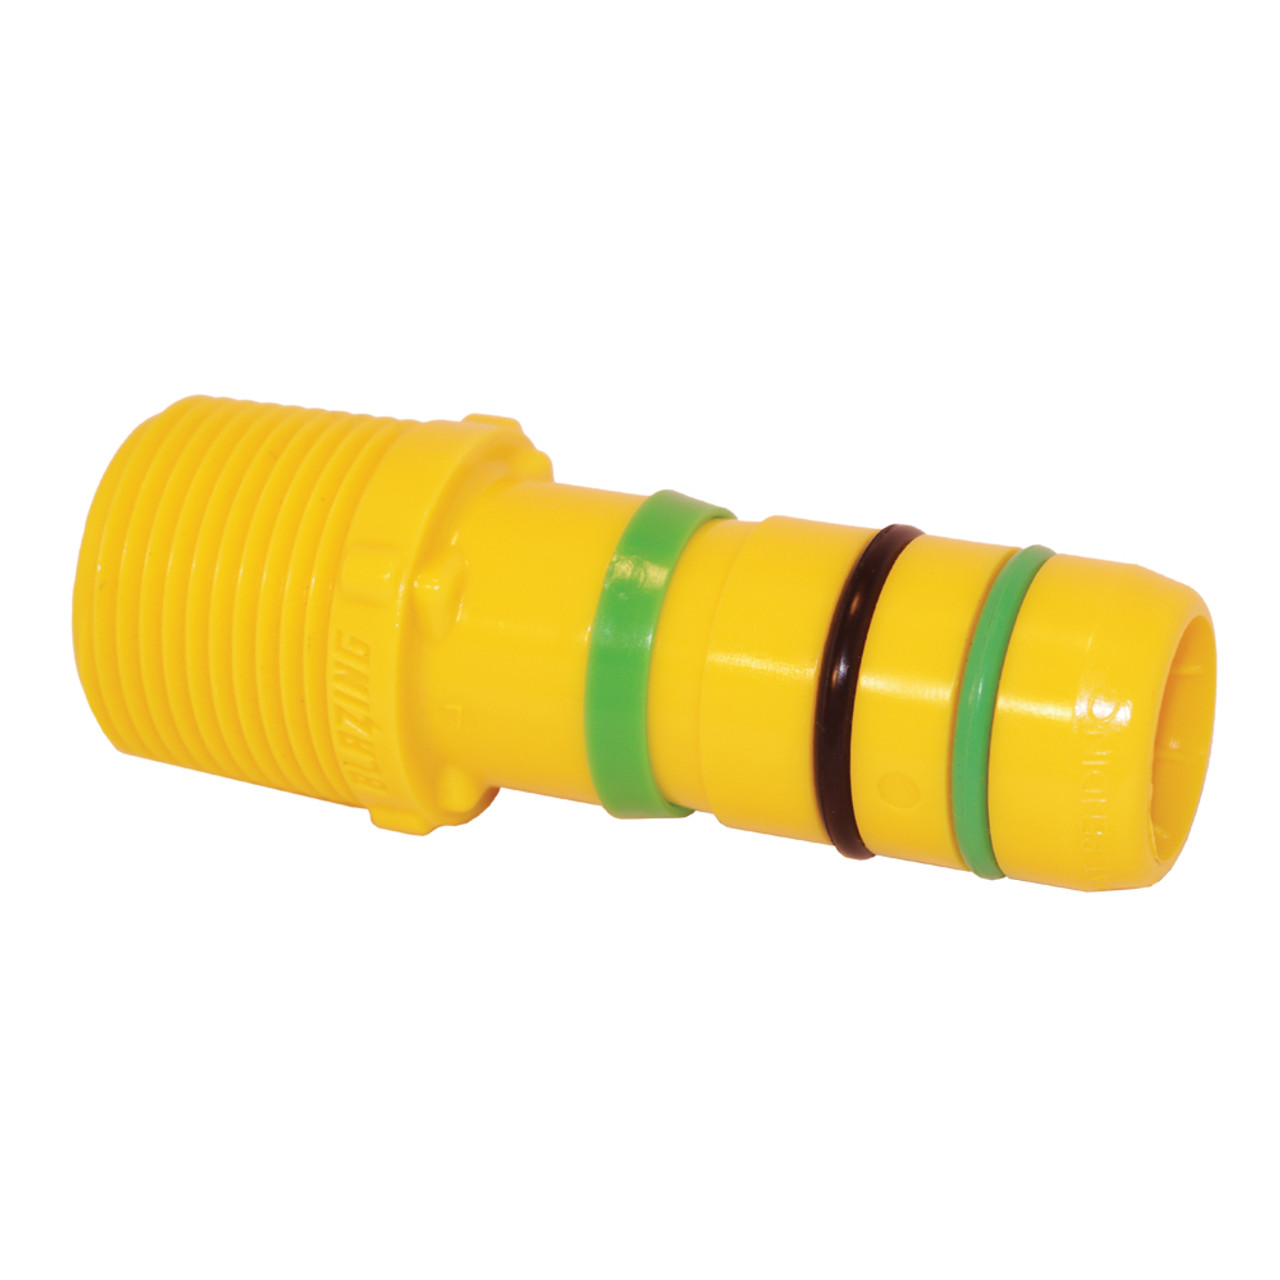 King InnovationÂ  1" x 1" MPT Insert Male Adapter- Fast Fitting BLZ1436-010